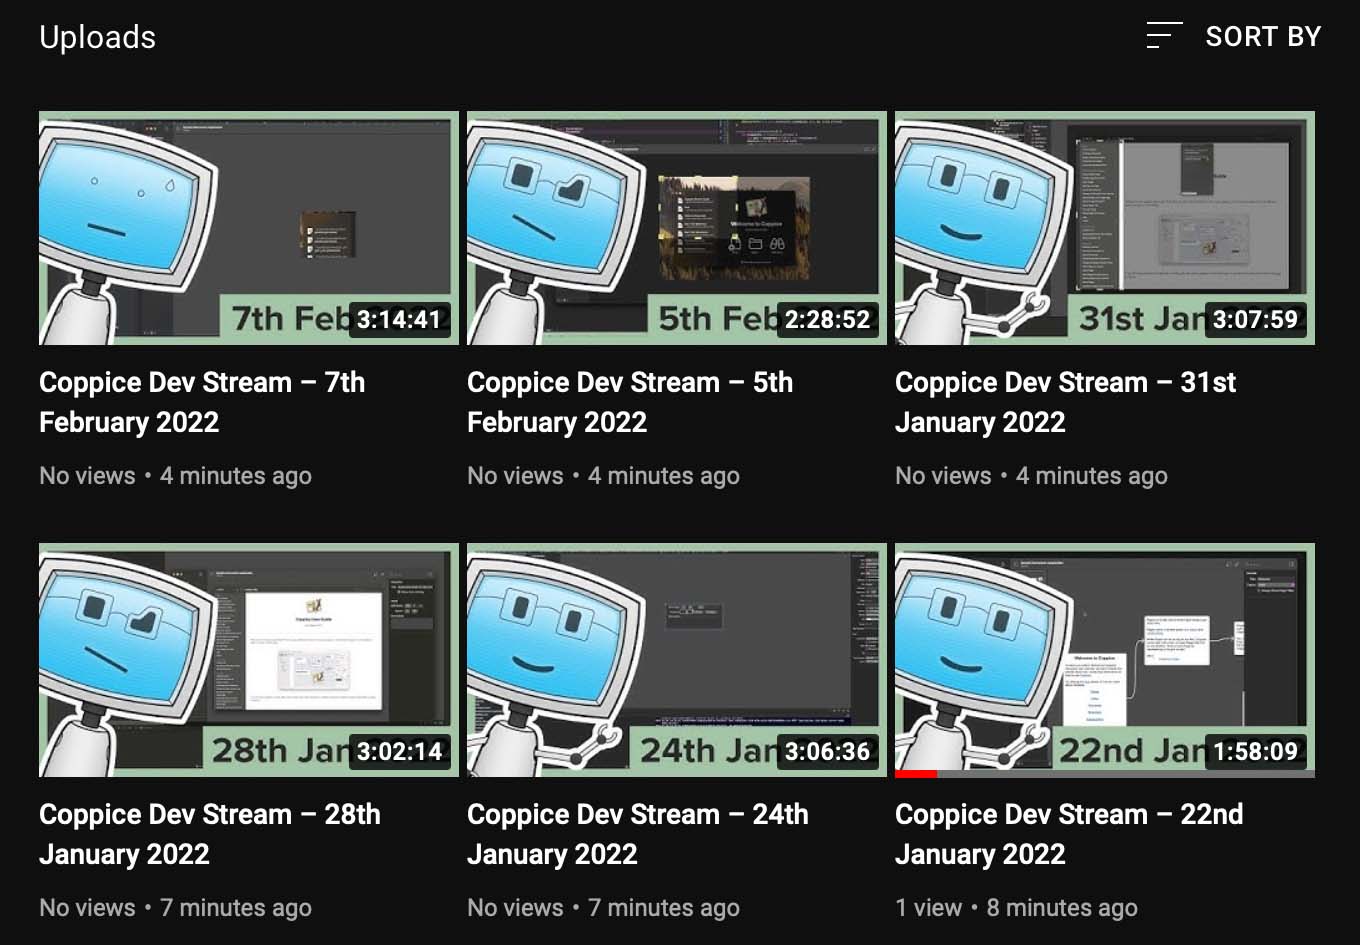 A grid of 6 youtube thumbnails for Coppice Dev Streams